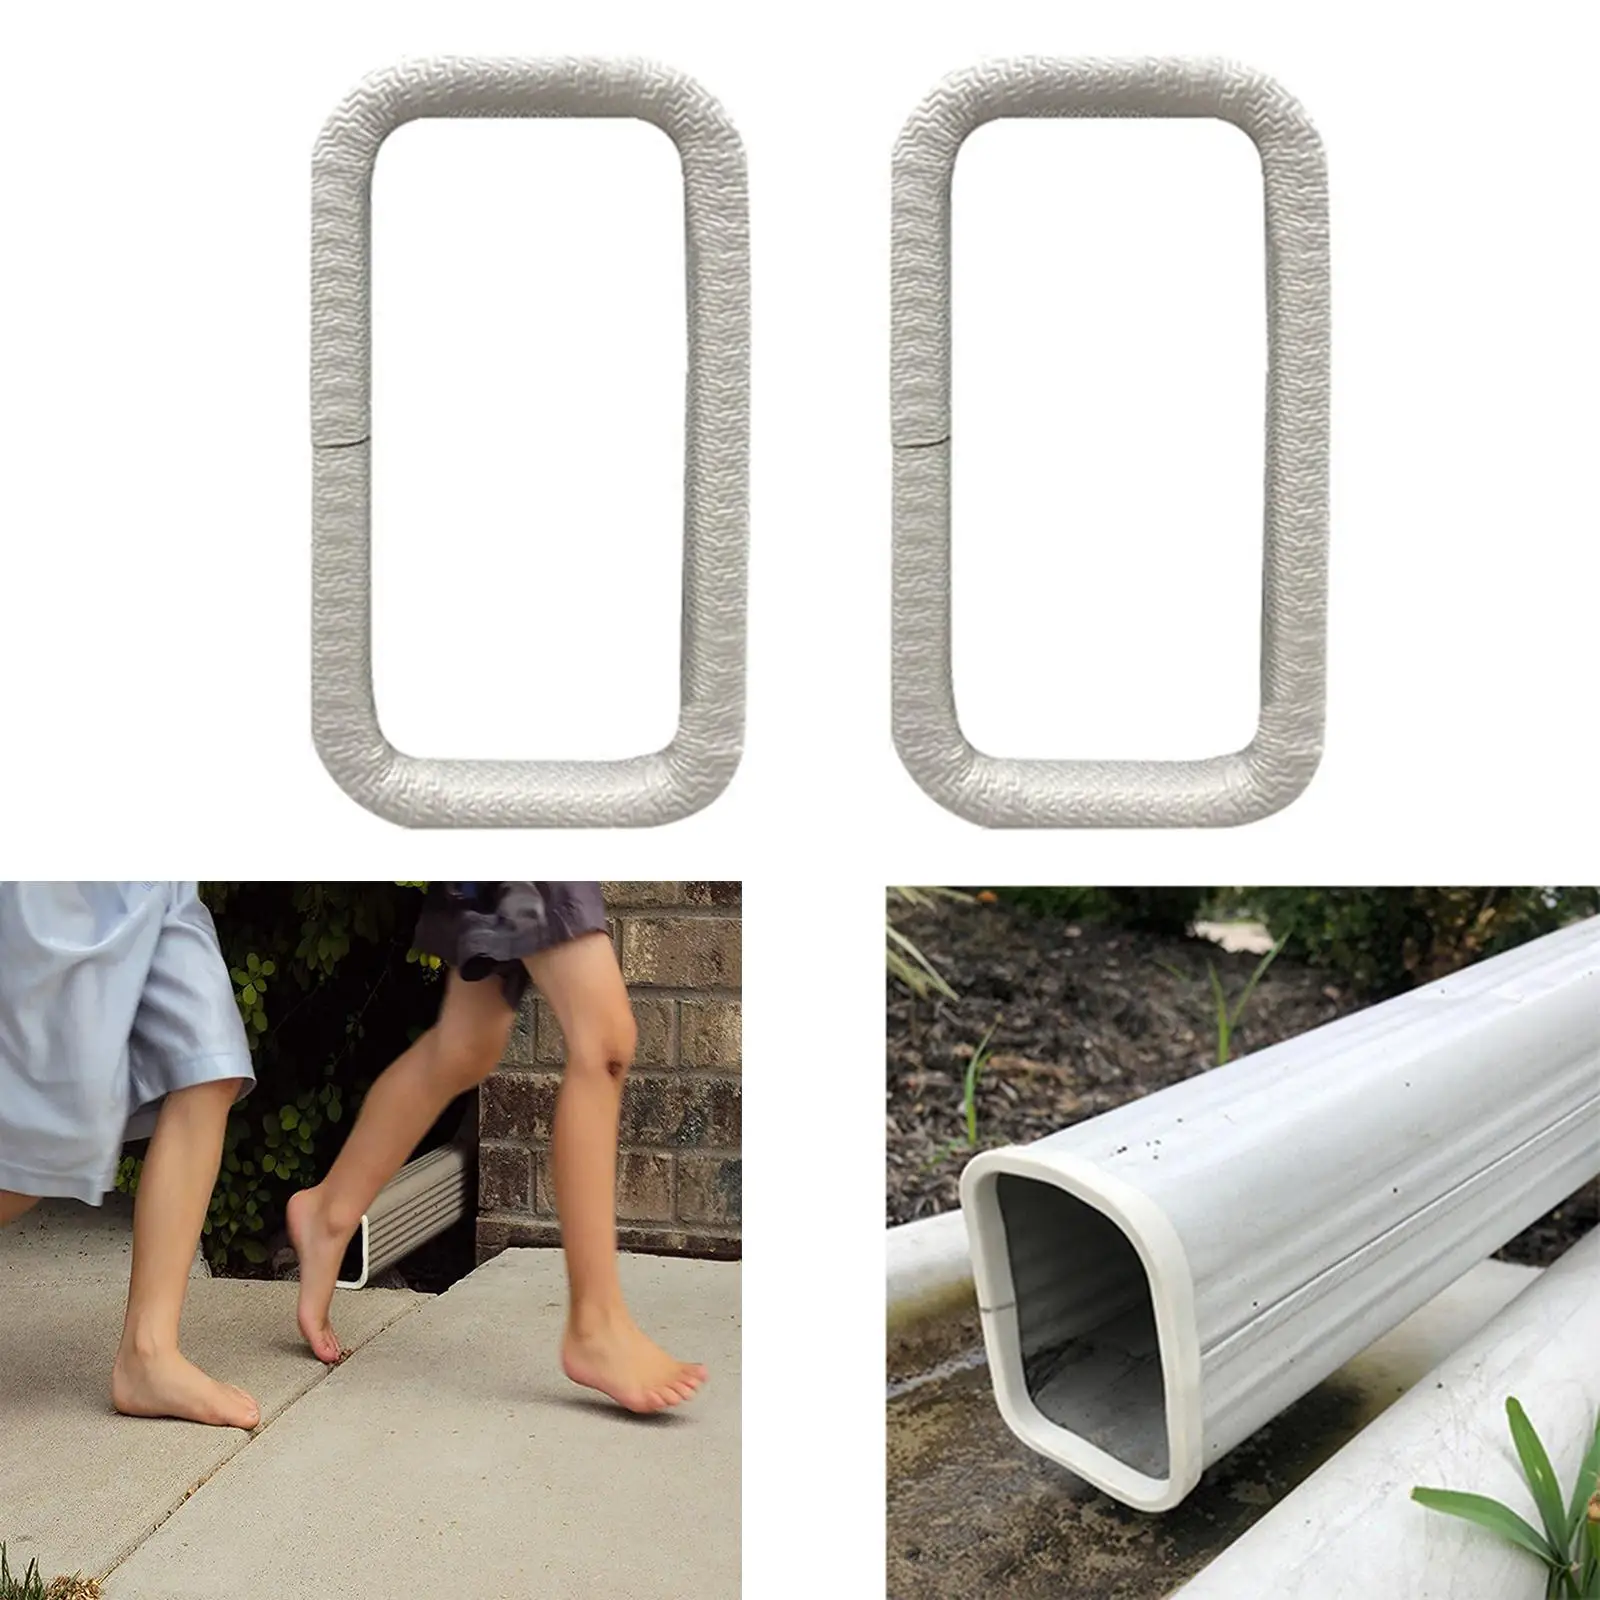 1 Piece Gutter Spout Protector Easy to Use Resin Ditch Protection Gutter Downspout Extensionprotection for Garden Children